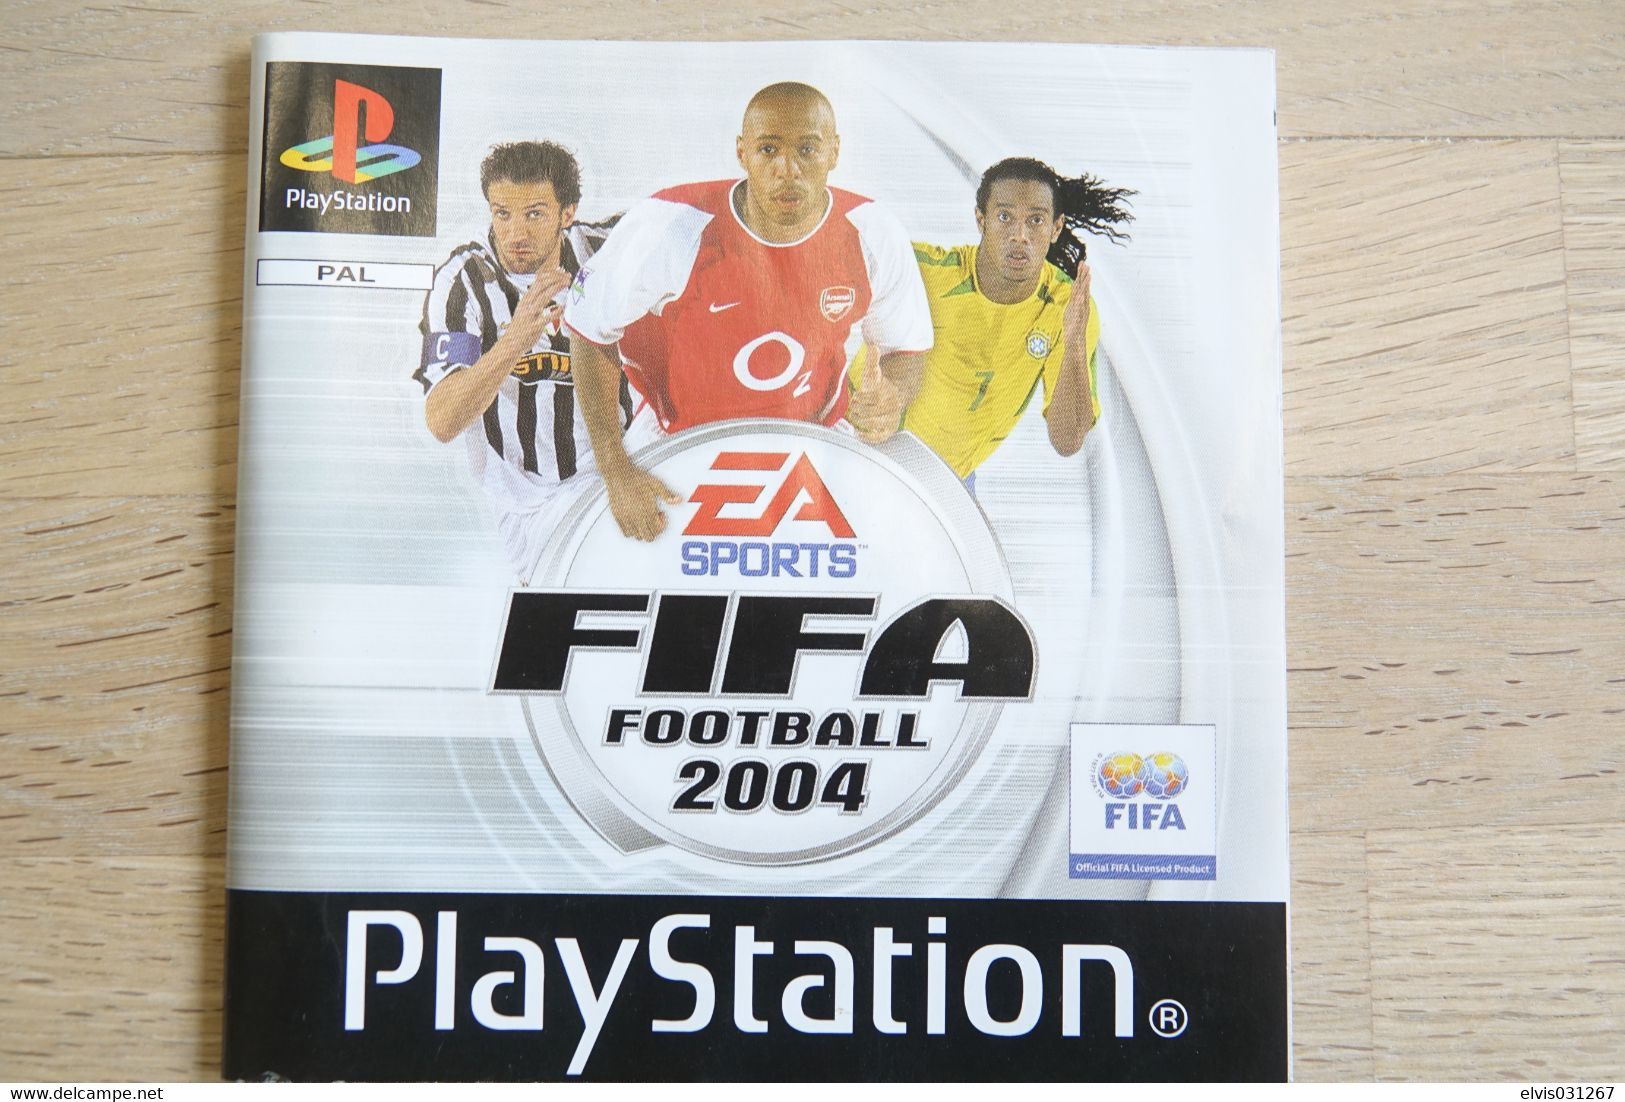 SONY PLAYSTATION ONE PS1 : MANUAL : FIFA 2004 - PAL - Literature & Instructions